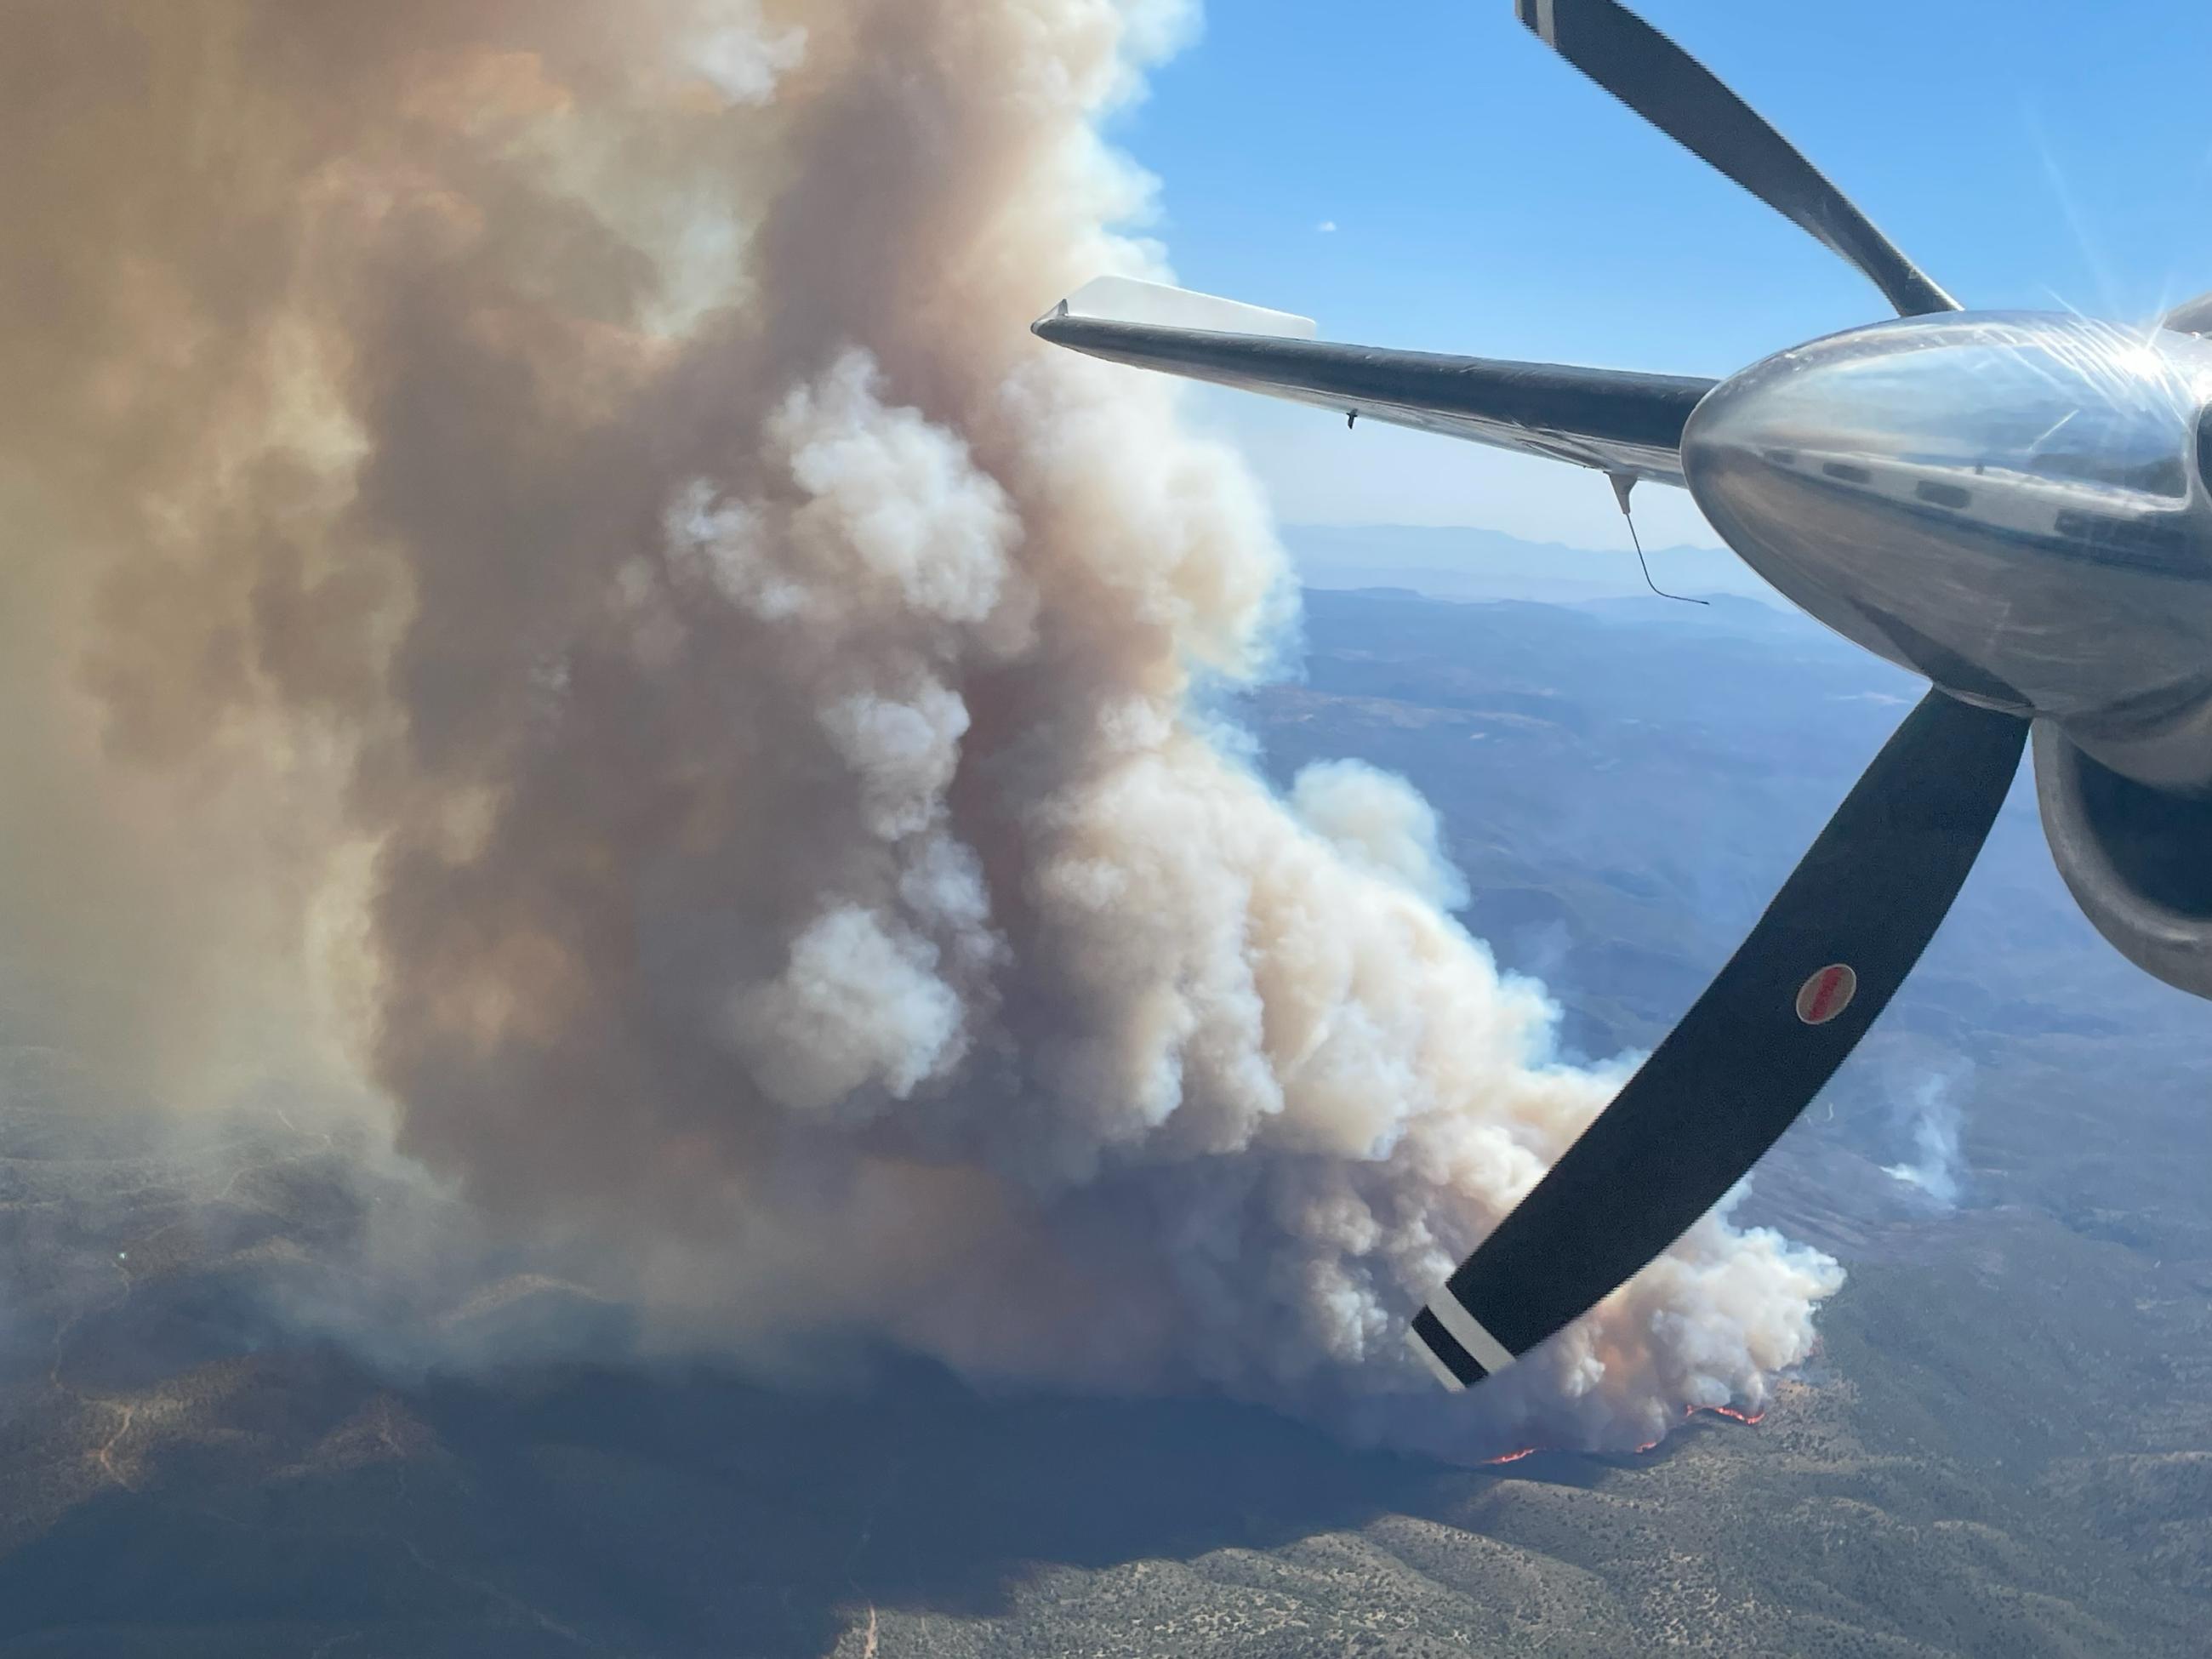 Aerial view of Spoon fire with large smoke plume and visible flames in background with aircraft propeller in foreground